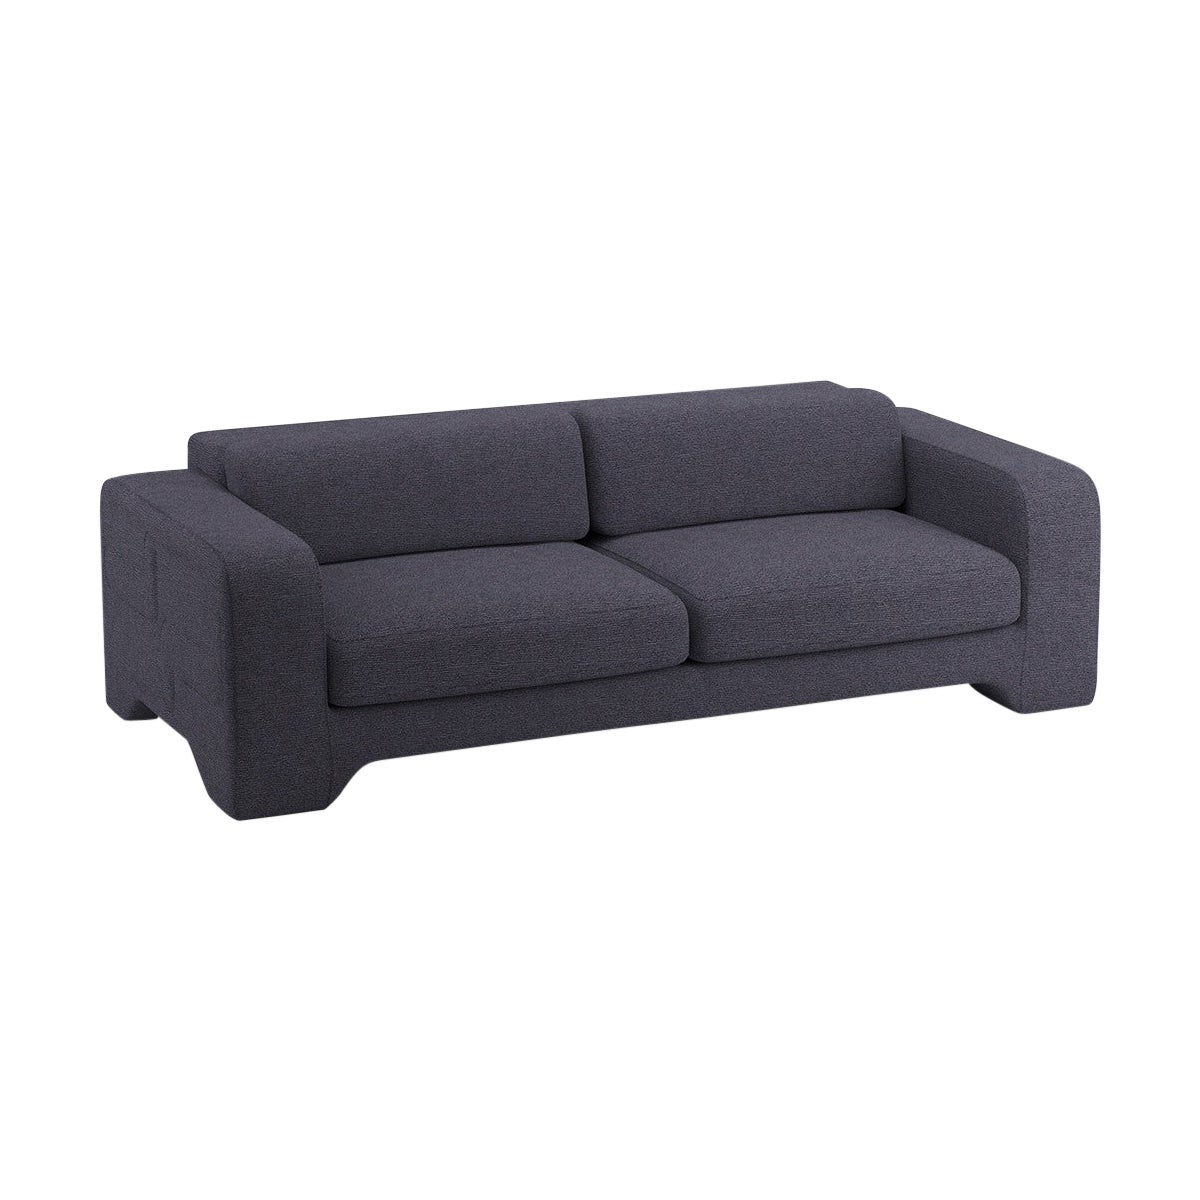 Popus Editions Giovanna 2.5 Seater Sofa in Anthracite Megeve Fabric Knit Effect For Sale